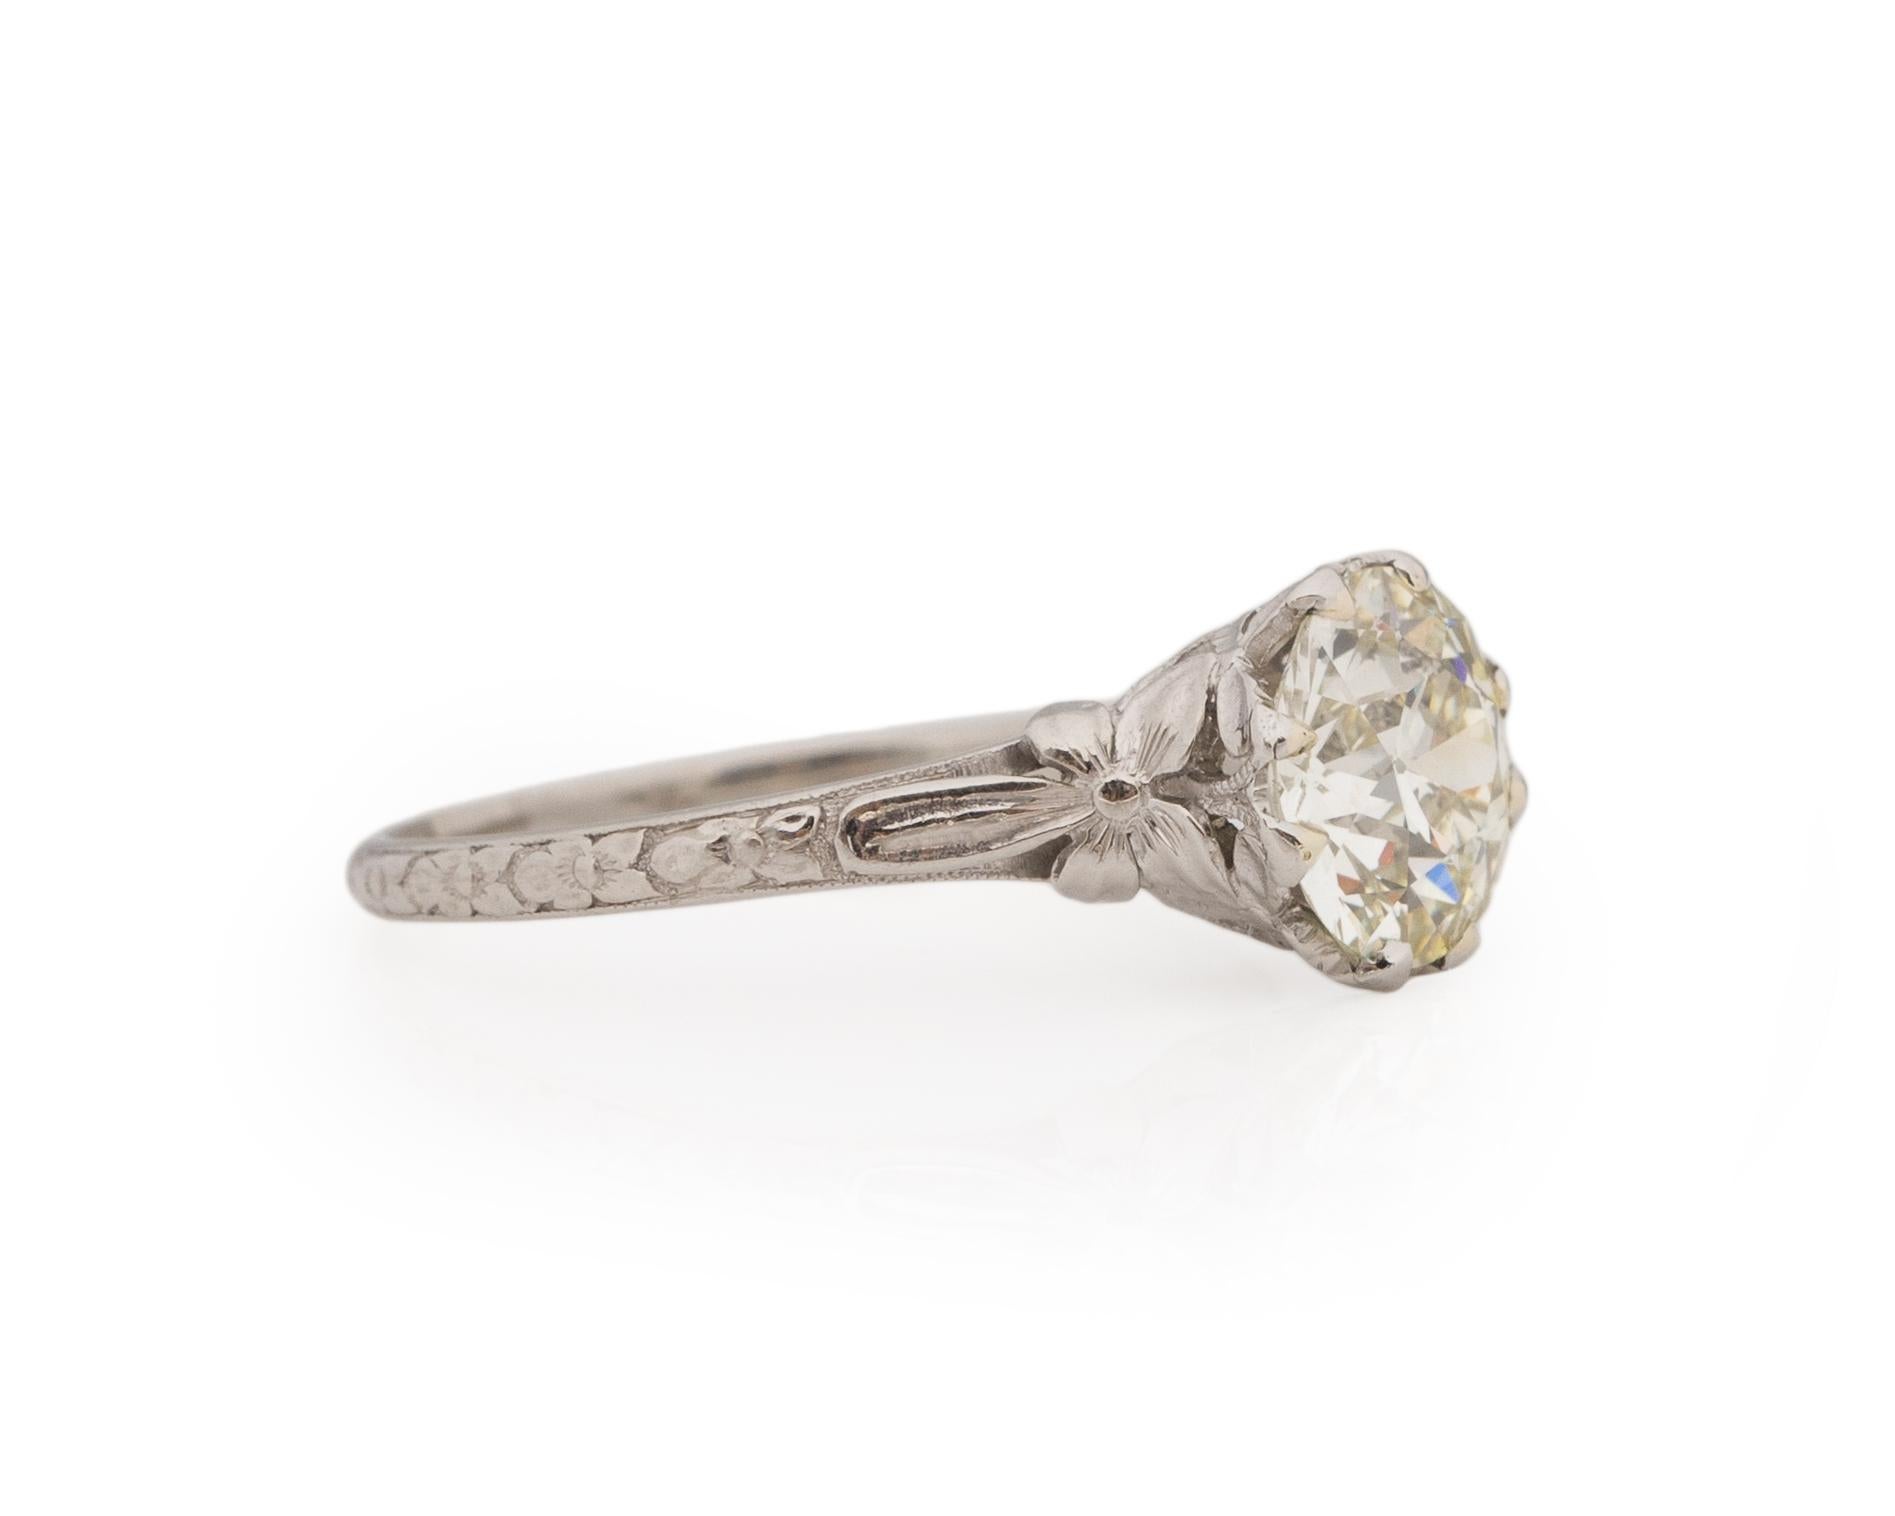 Ring Size: 6.25
Metal Type: Platinum [Hallmarked, and Tested]
Weight: 3.0 grams

Diamond Details:
GIA REPORT #: 6224451179
Weight: 1.56ct
Cut: Old European brilliant
Color: N
Clarity: VS2
Measurements: 7.72mm x 7.63mm x 4.47mm

Finger to Top of